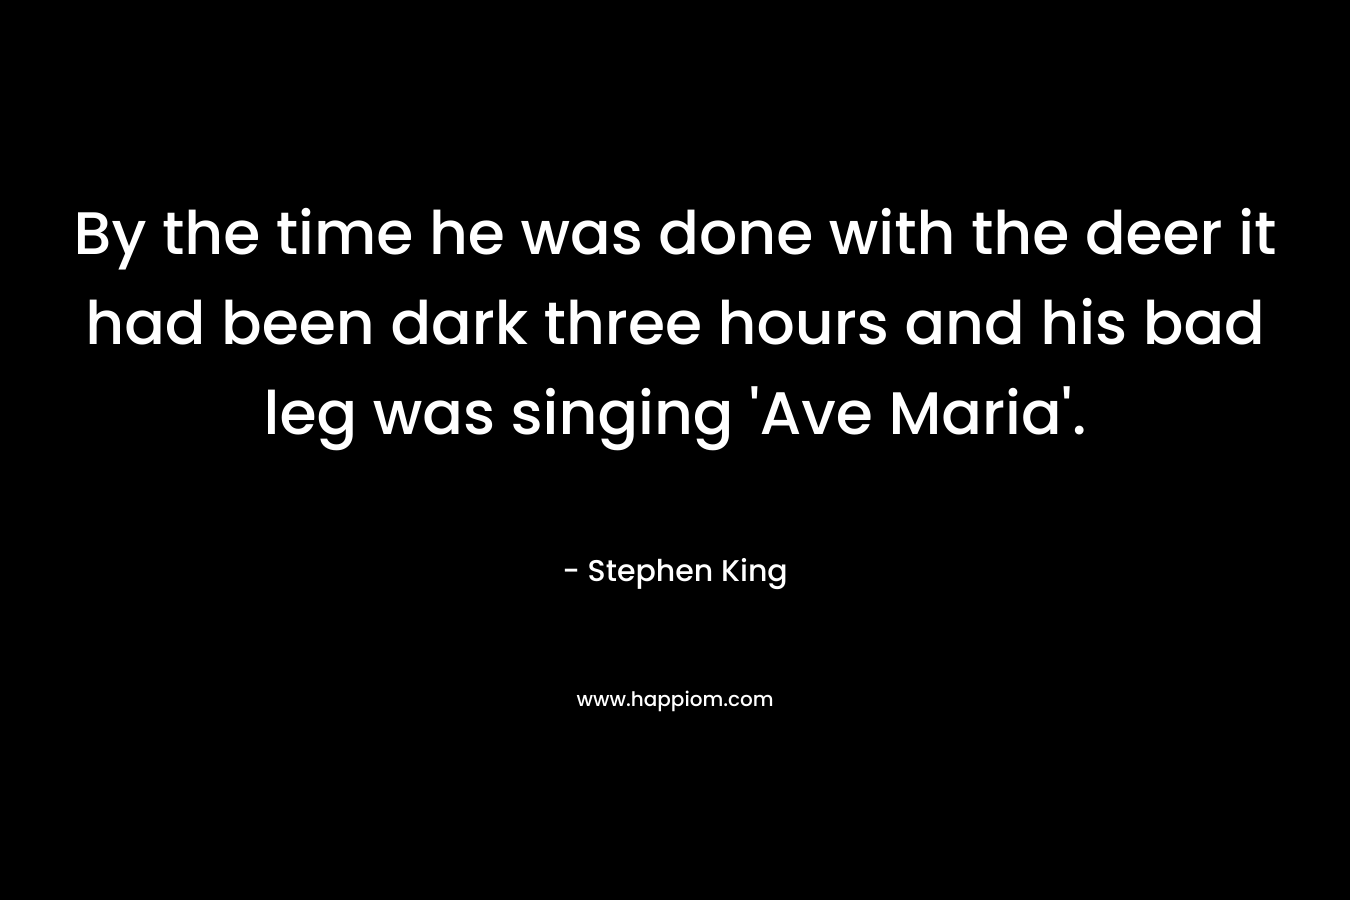 By the time he was done with the deer it had been dark three hours and his bad leg was singing ‘Ave Maria’. – Stephen King